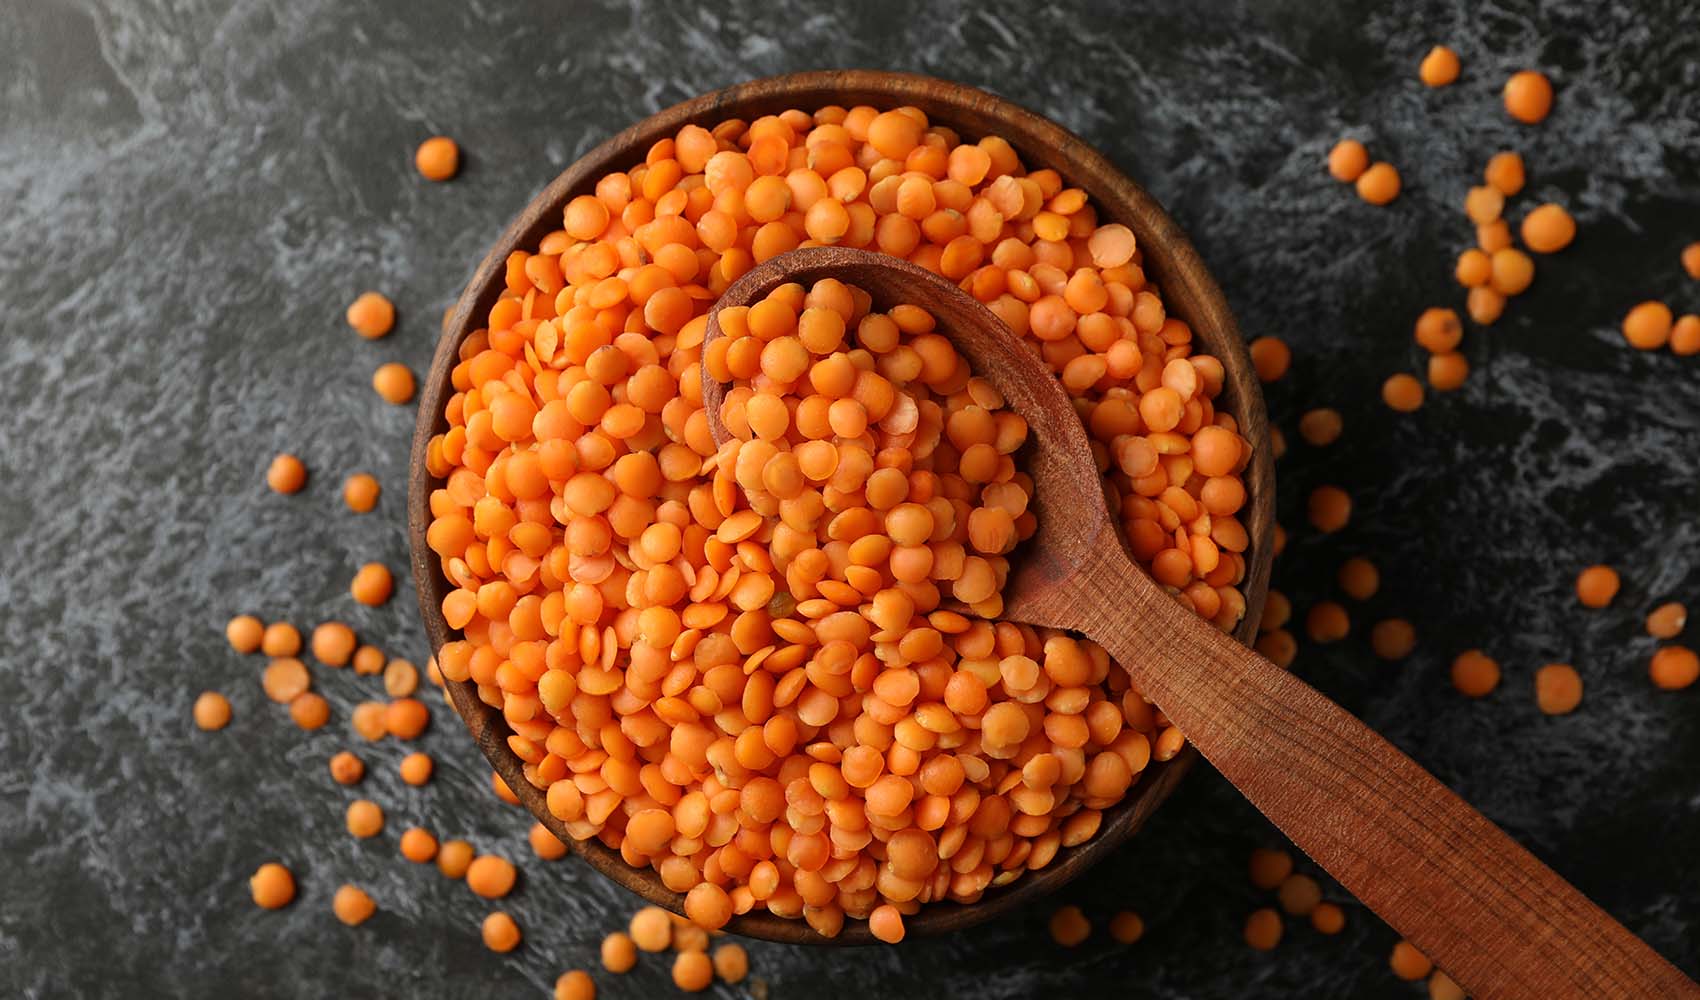 Red-Lentils-Benefits-Nutrition-And-Uses-2